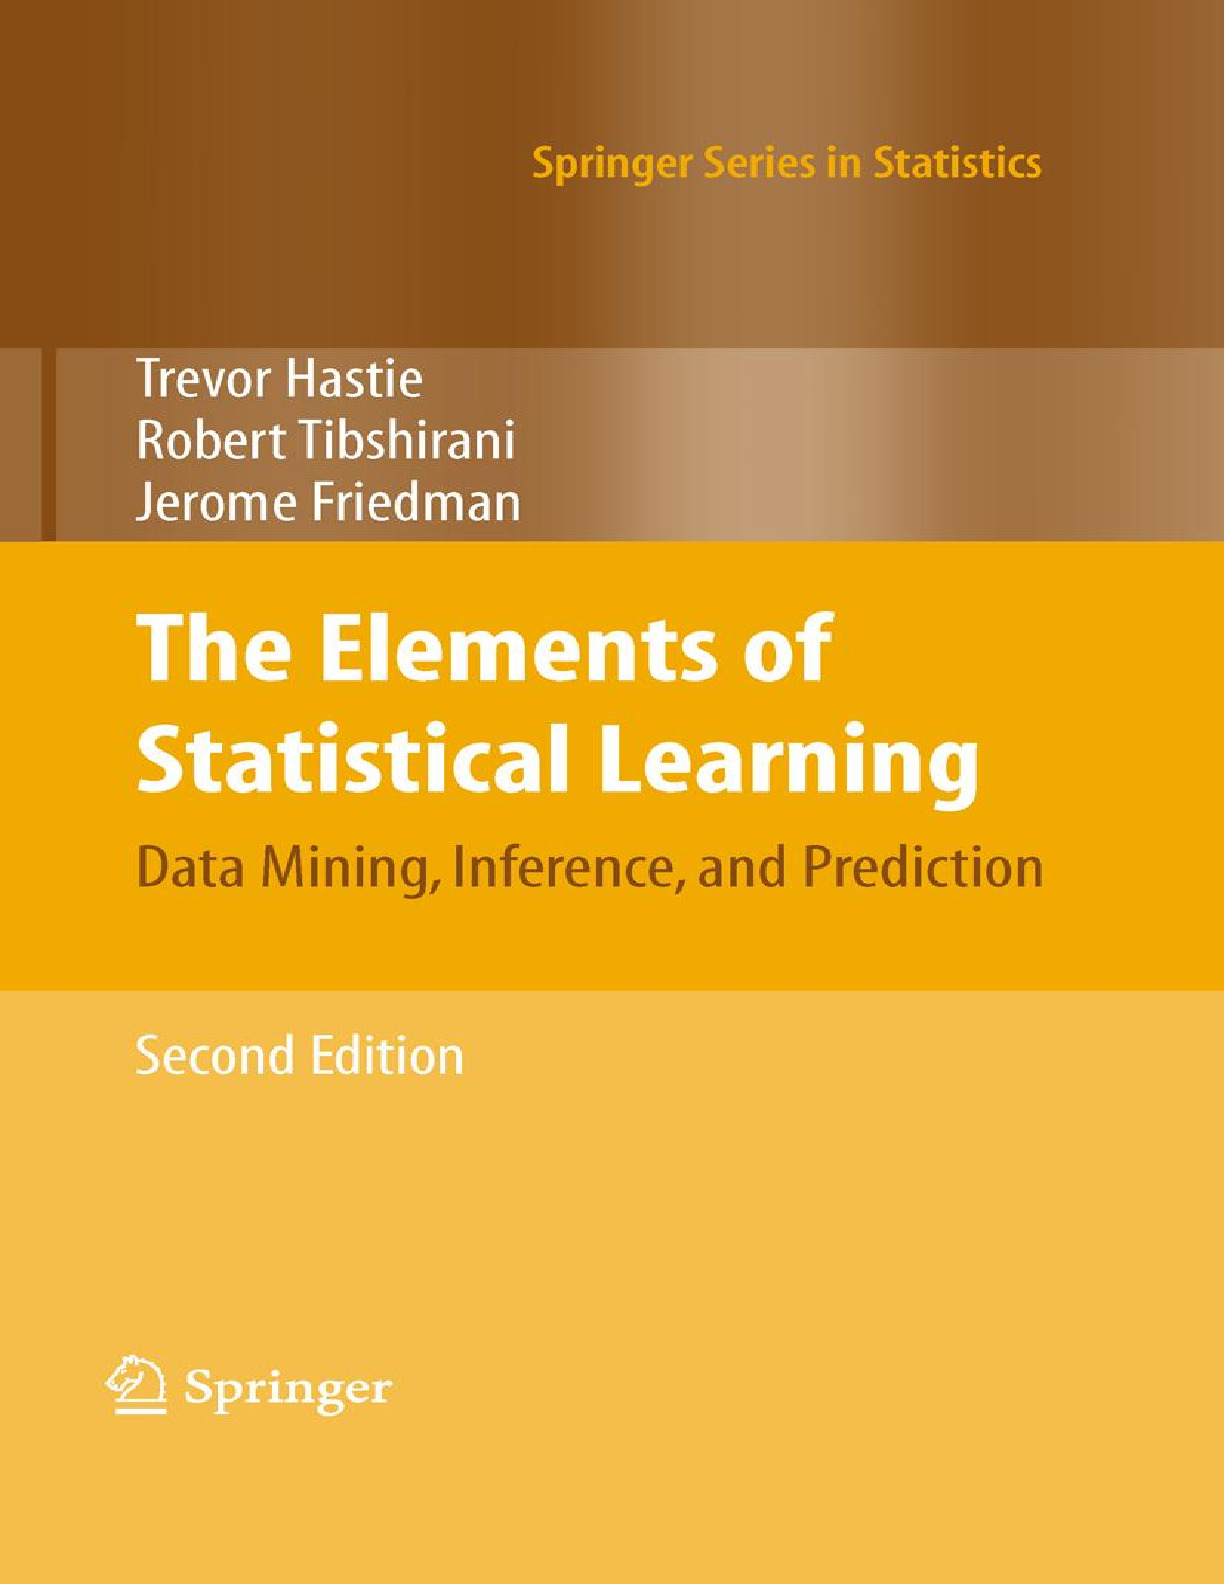 The Elements of Statistical Learning – Data Mining, Inference, and Prediction